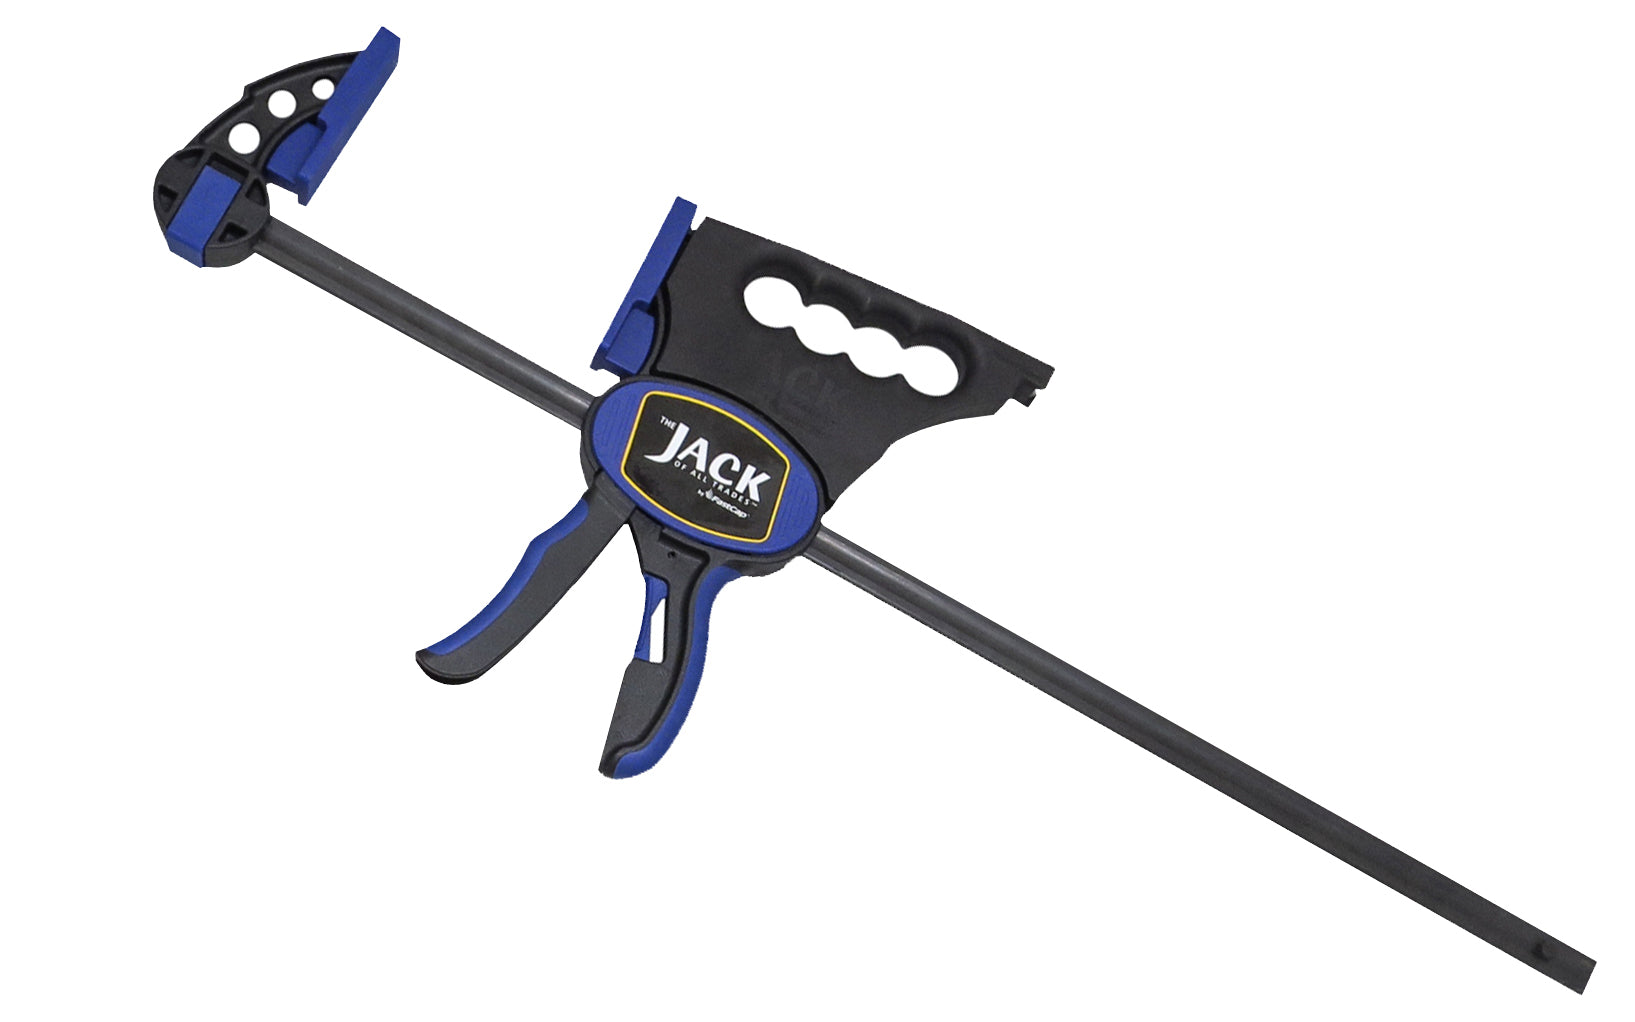 FastCap Jack-Of-All-Trades Multi Purpose Clamp, Spreader, & Lift